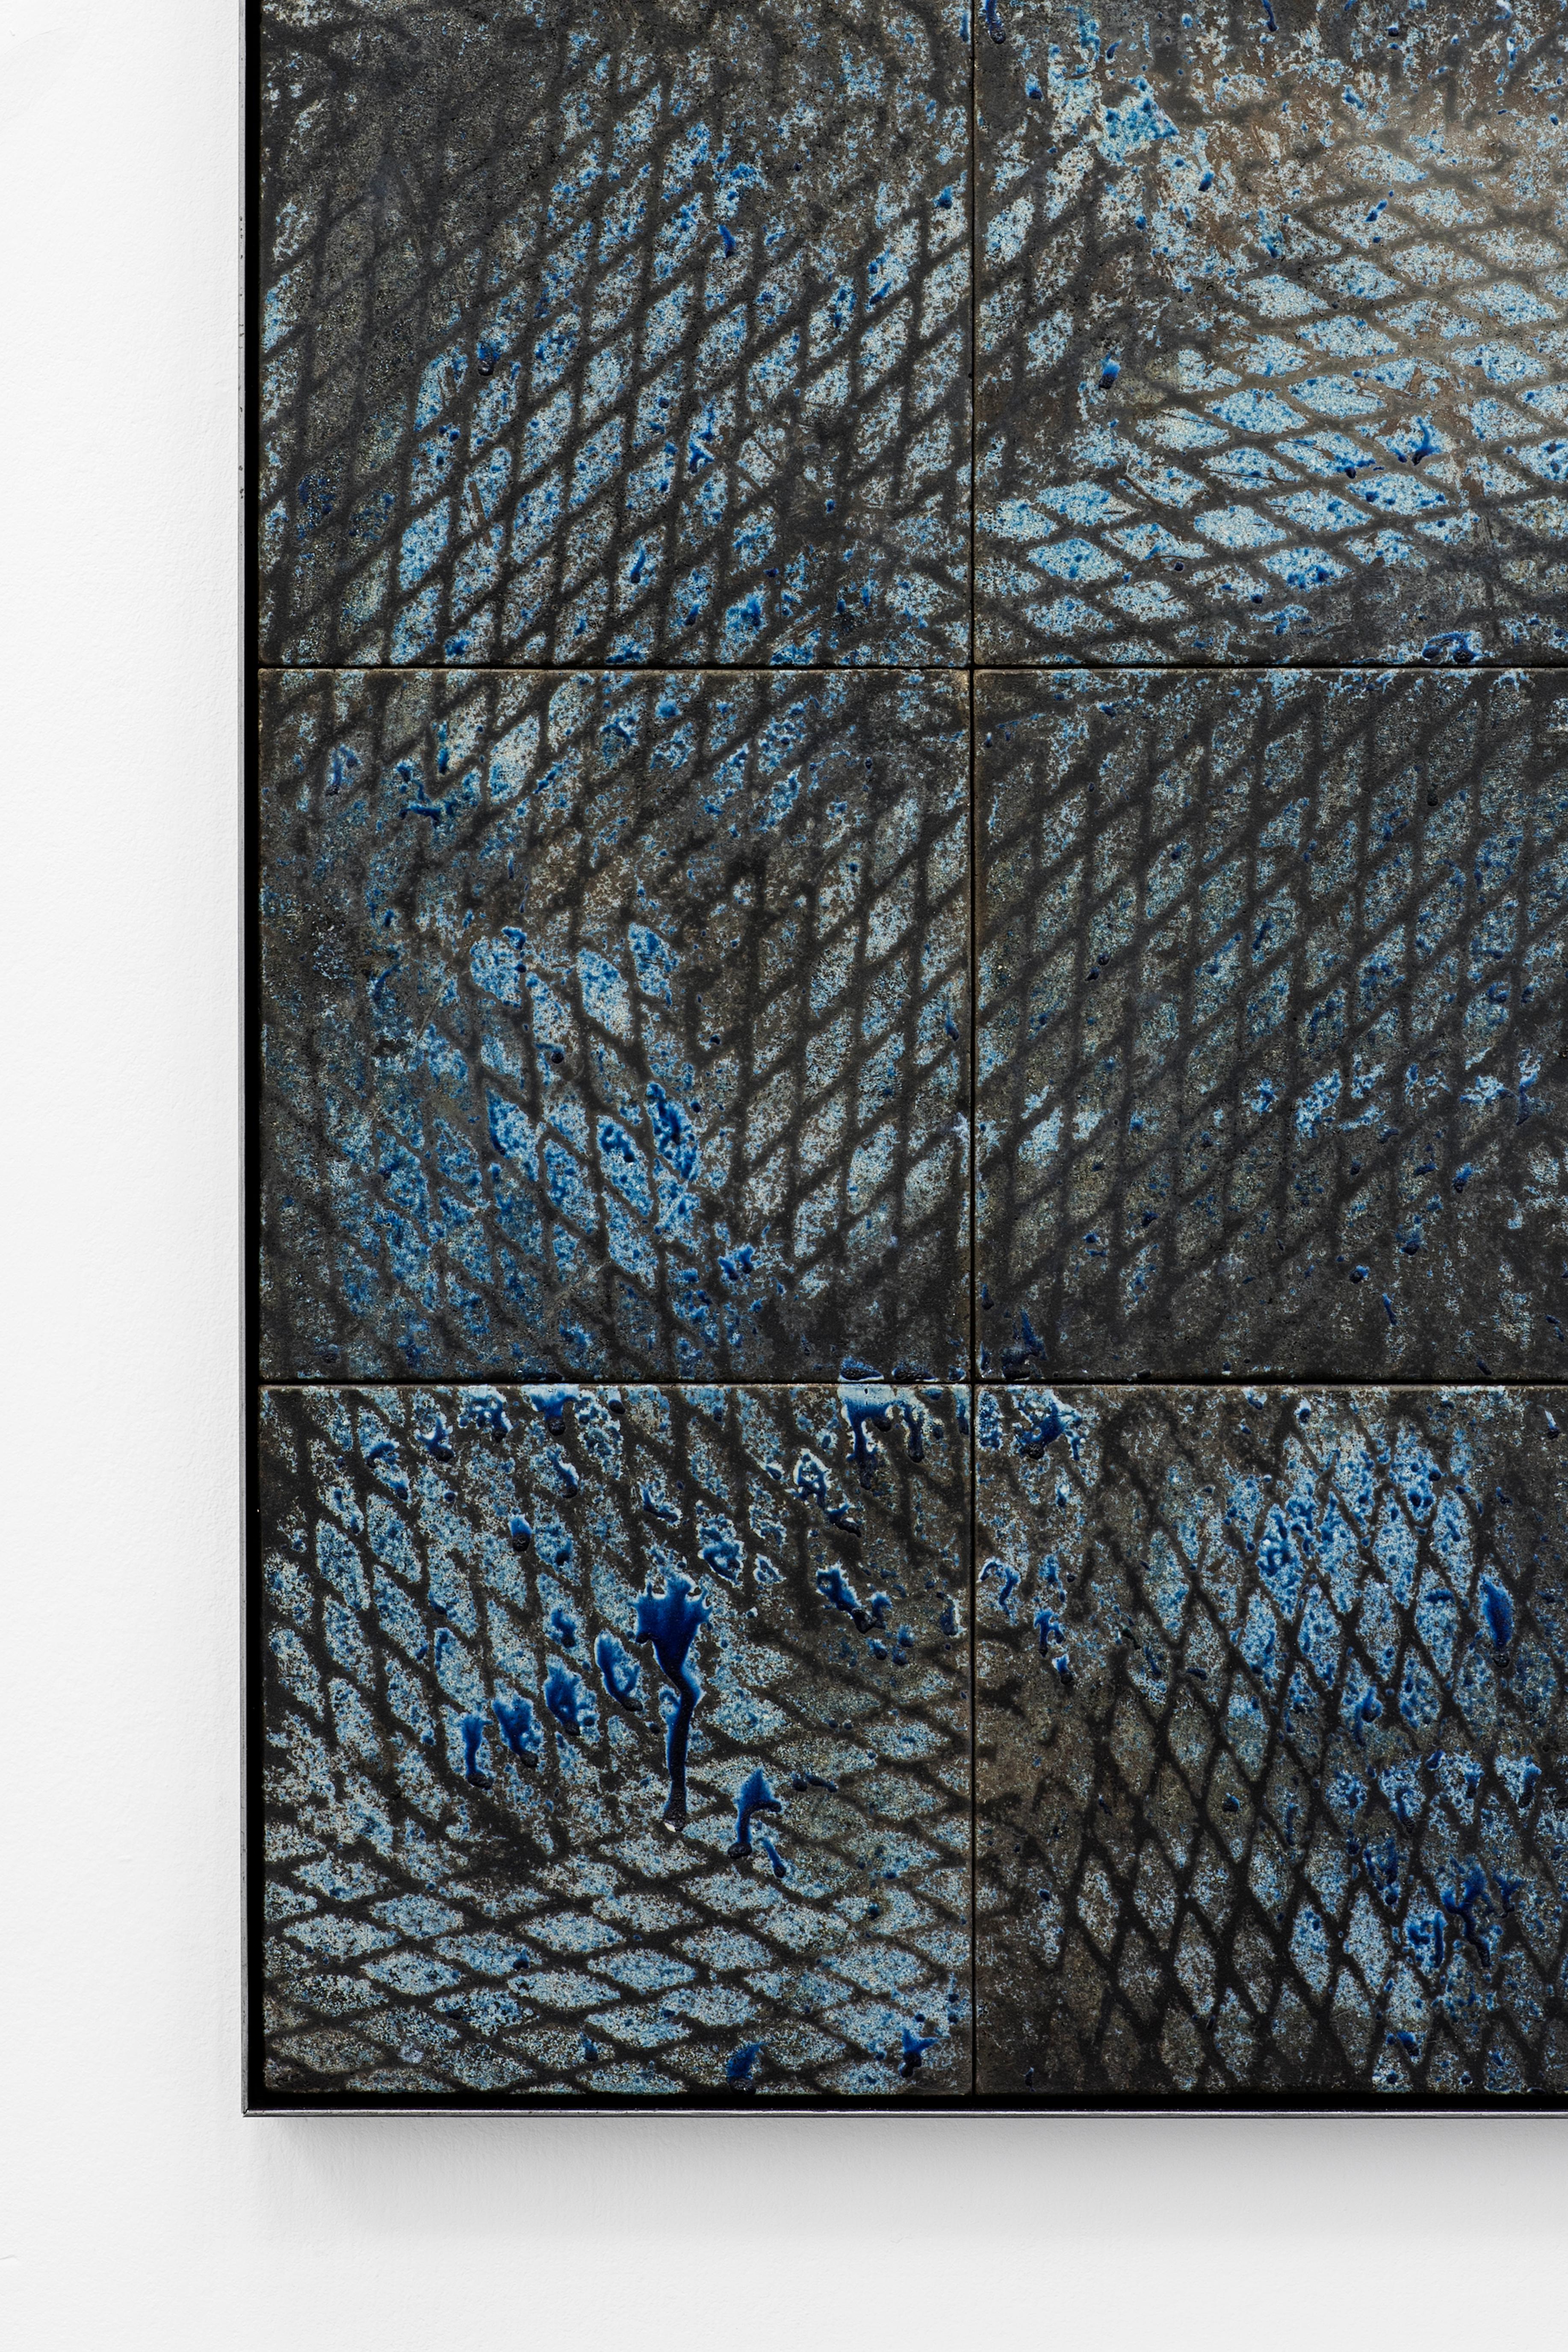 Blue, Expanded Metal Tile. Wall Sculpture - Abstract Mixed Media Art by Clemens Wolf